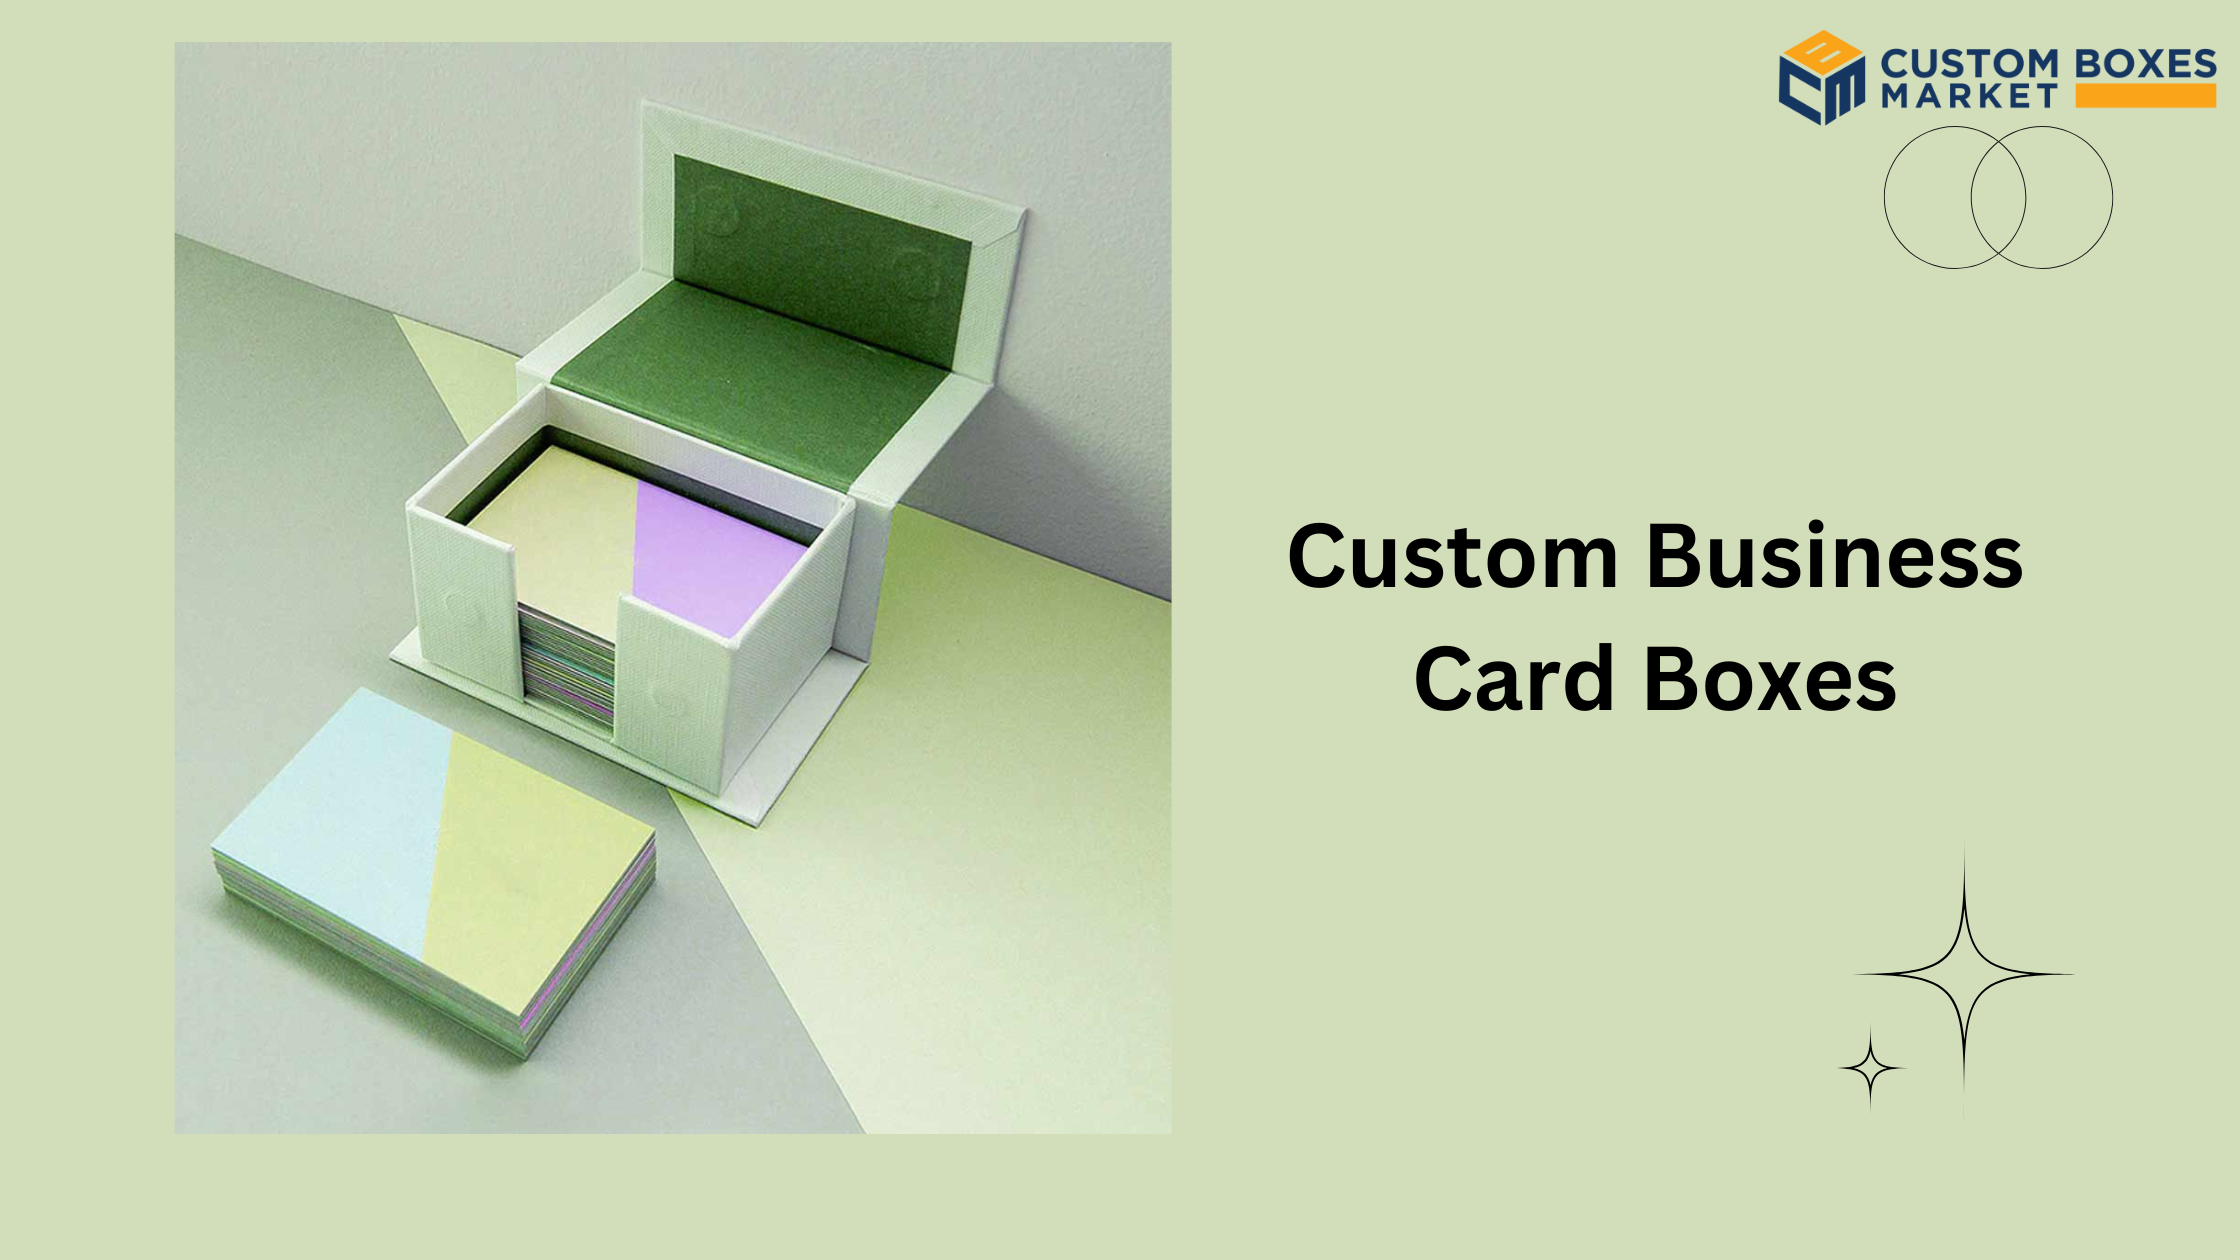 7 Facts About Custom Business Card Boxes For Professionals